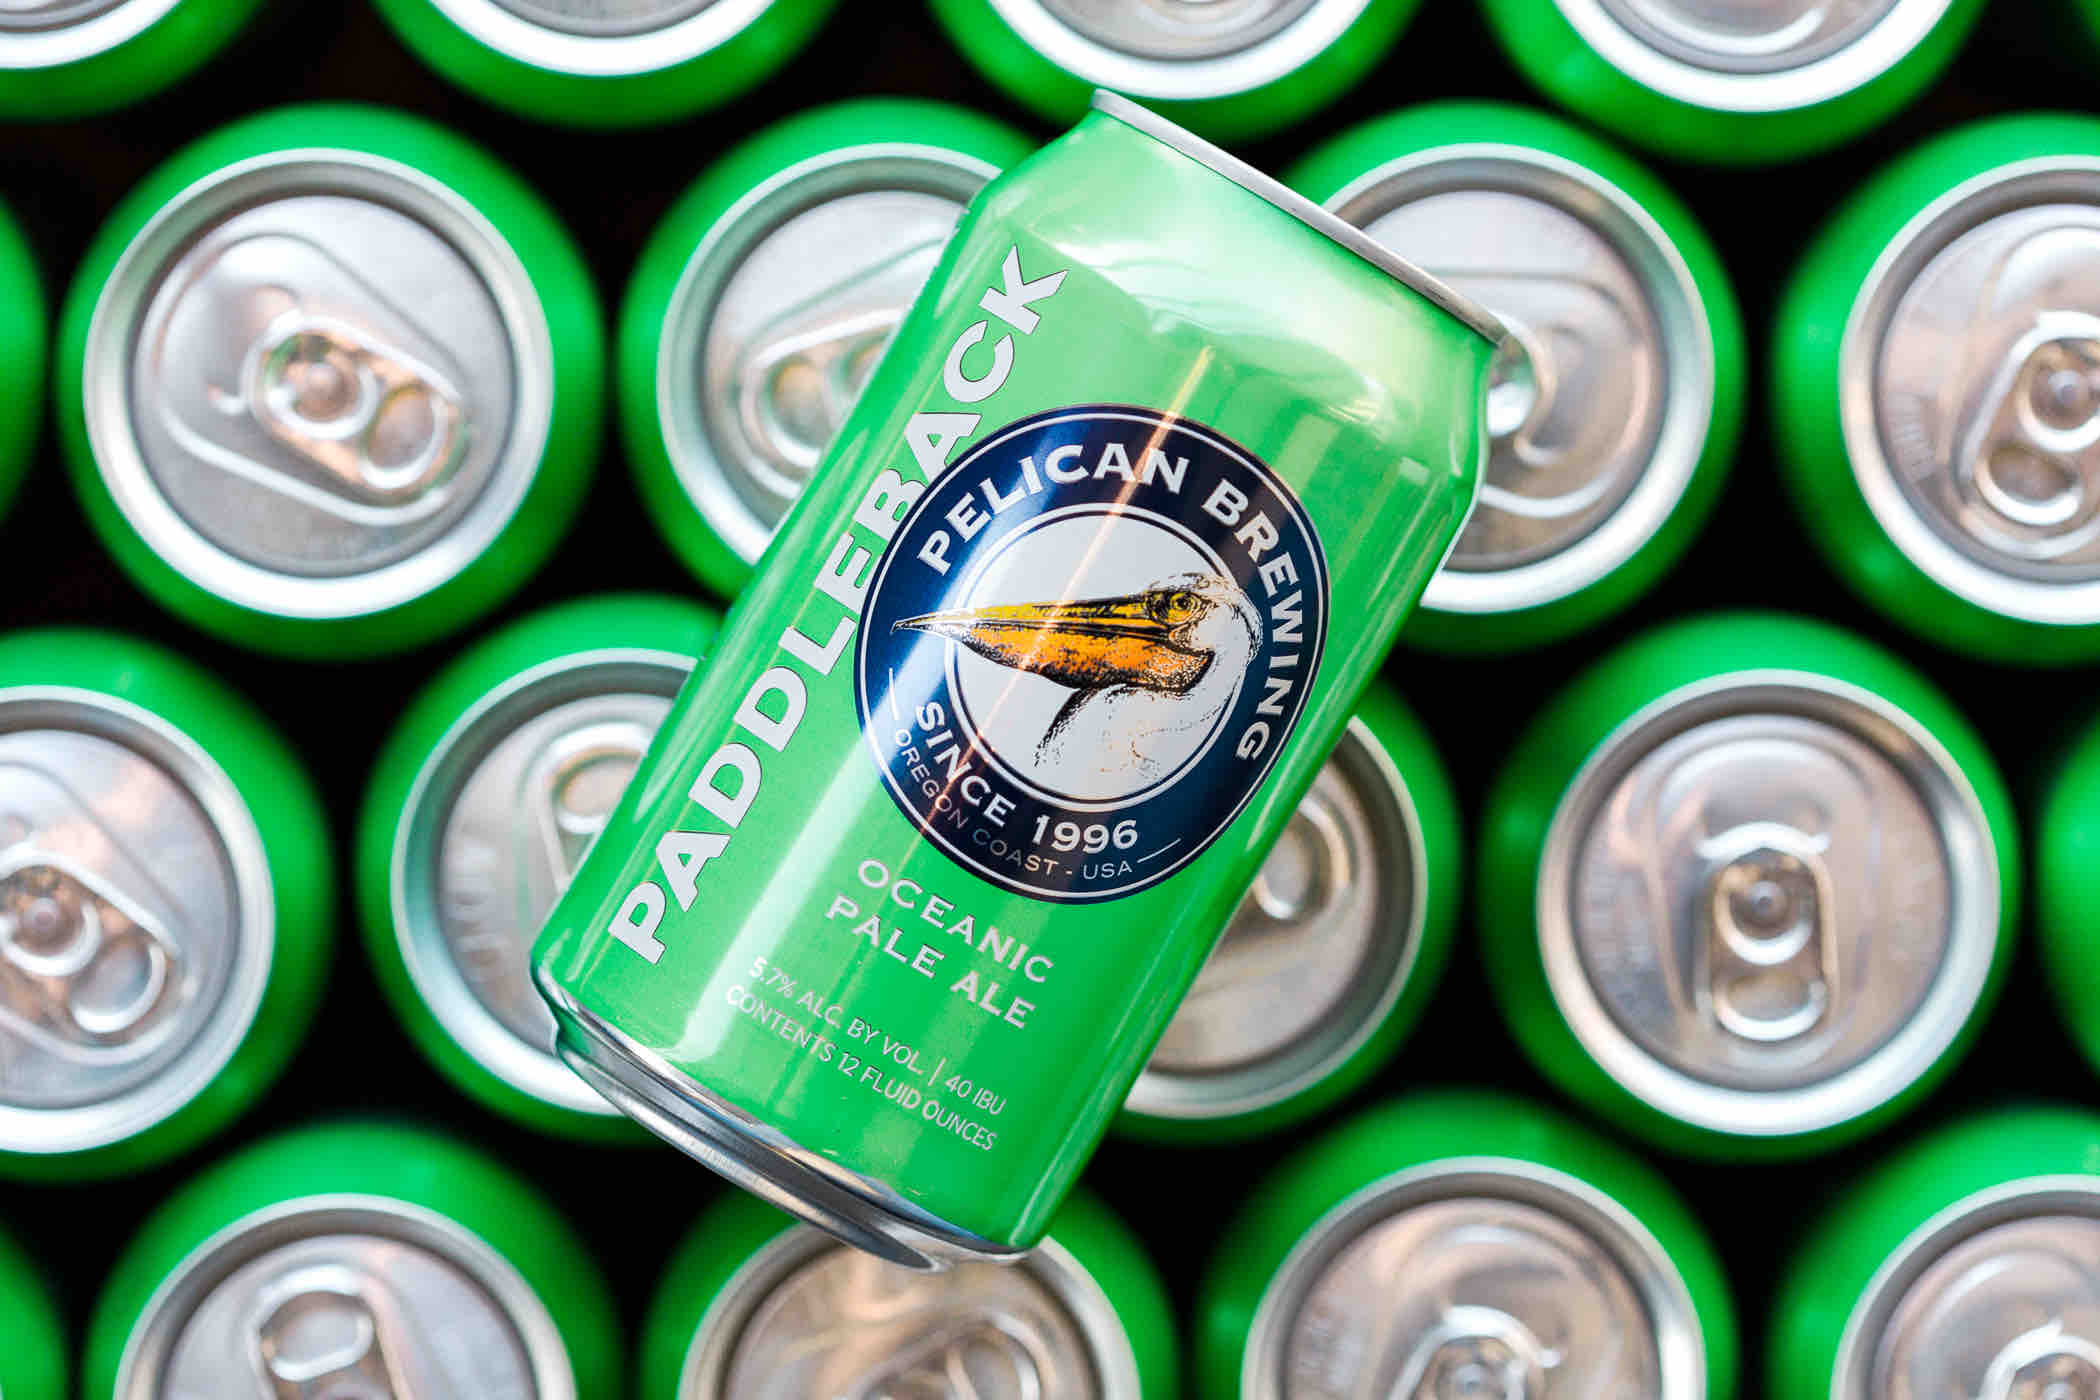 image of Paddleback Oceanic Pale Ale courtesy of Pelican Brewing Co.